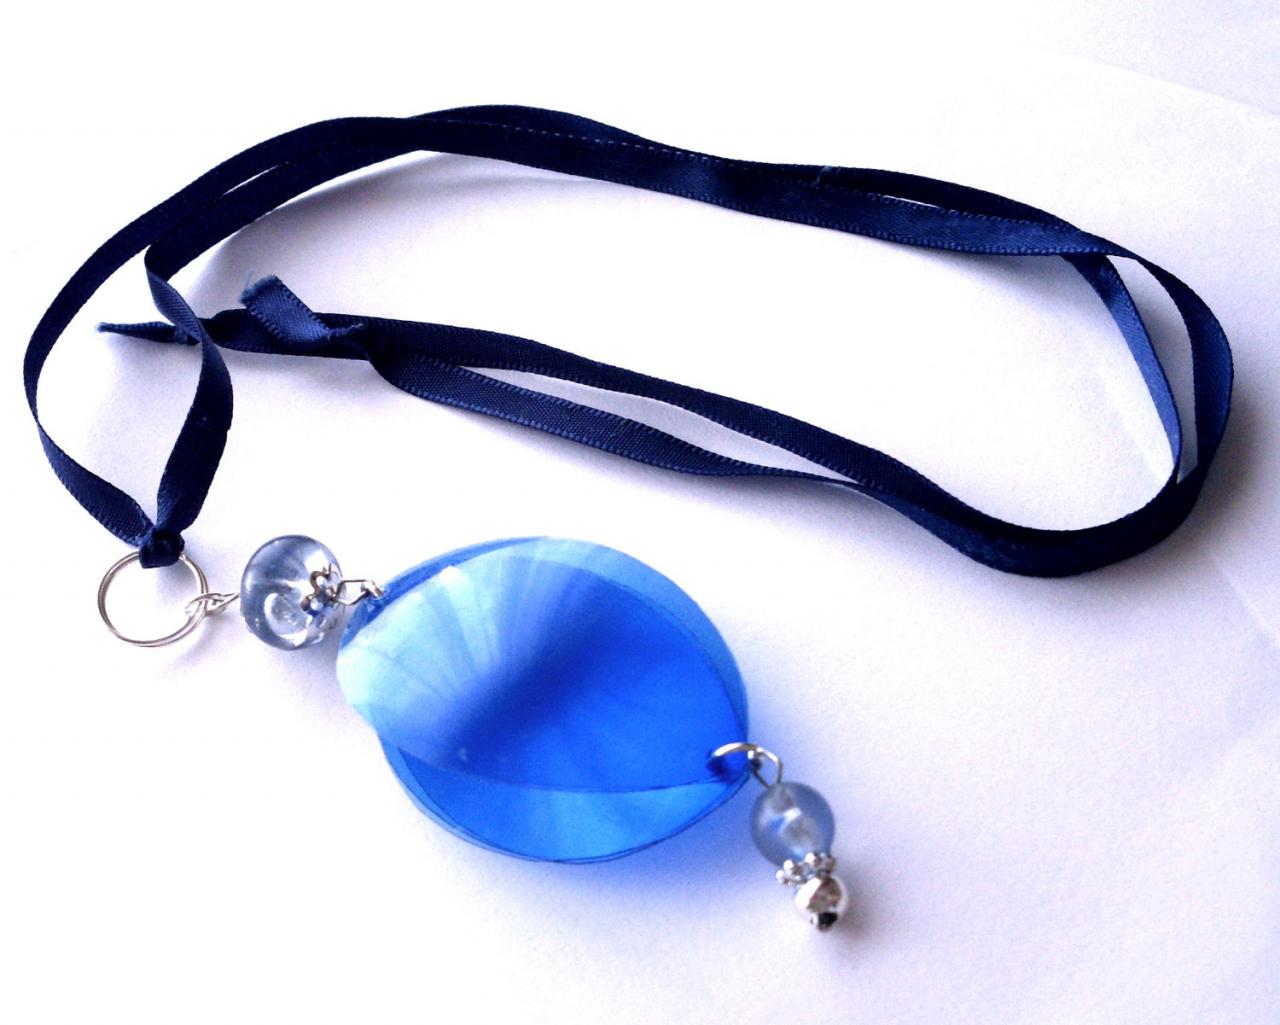 Blue Pendant Necklace Handmade Of Recycled Plastic Bottles On Navy Blue Ribbon - Upcycled Jewelry, Ecofriendly, Repurposed, Cobalt Blue